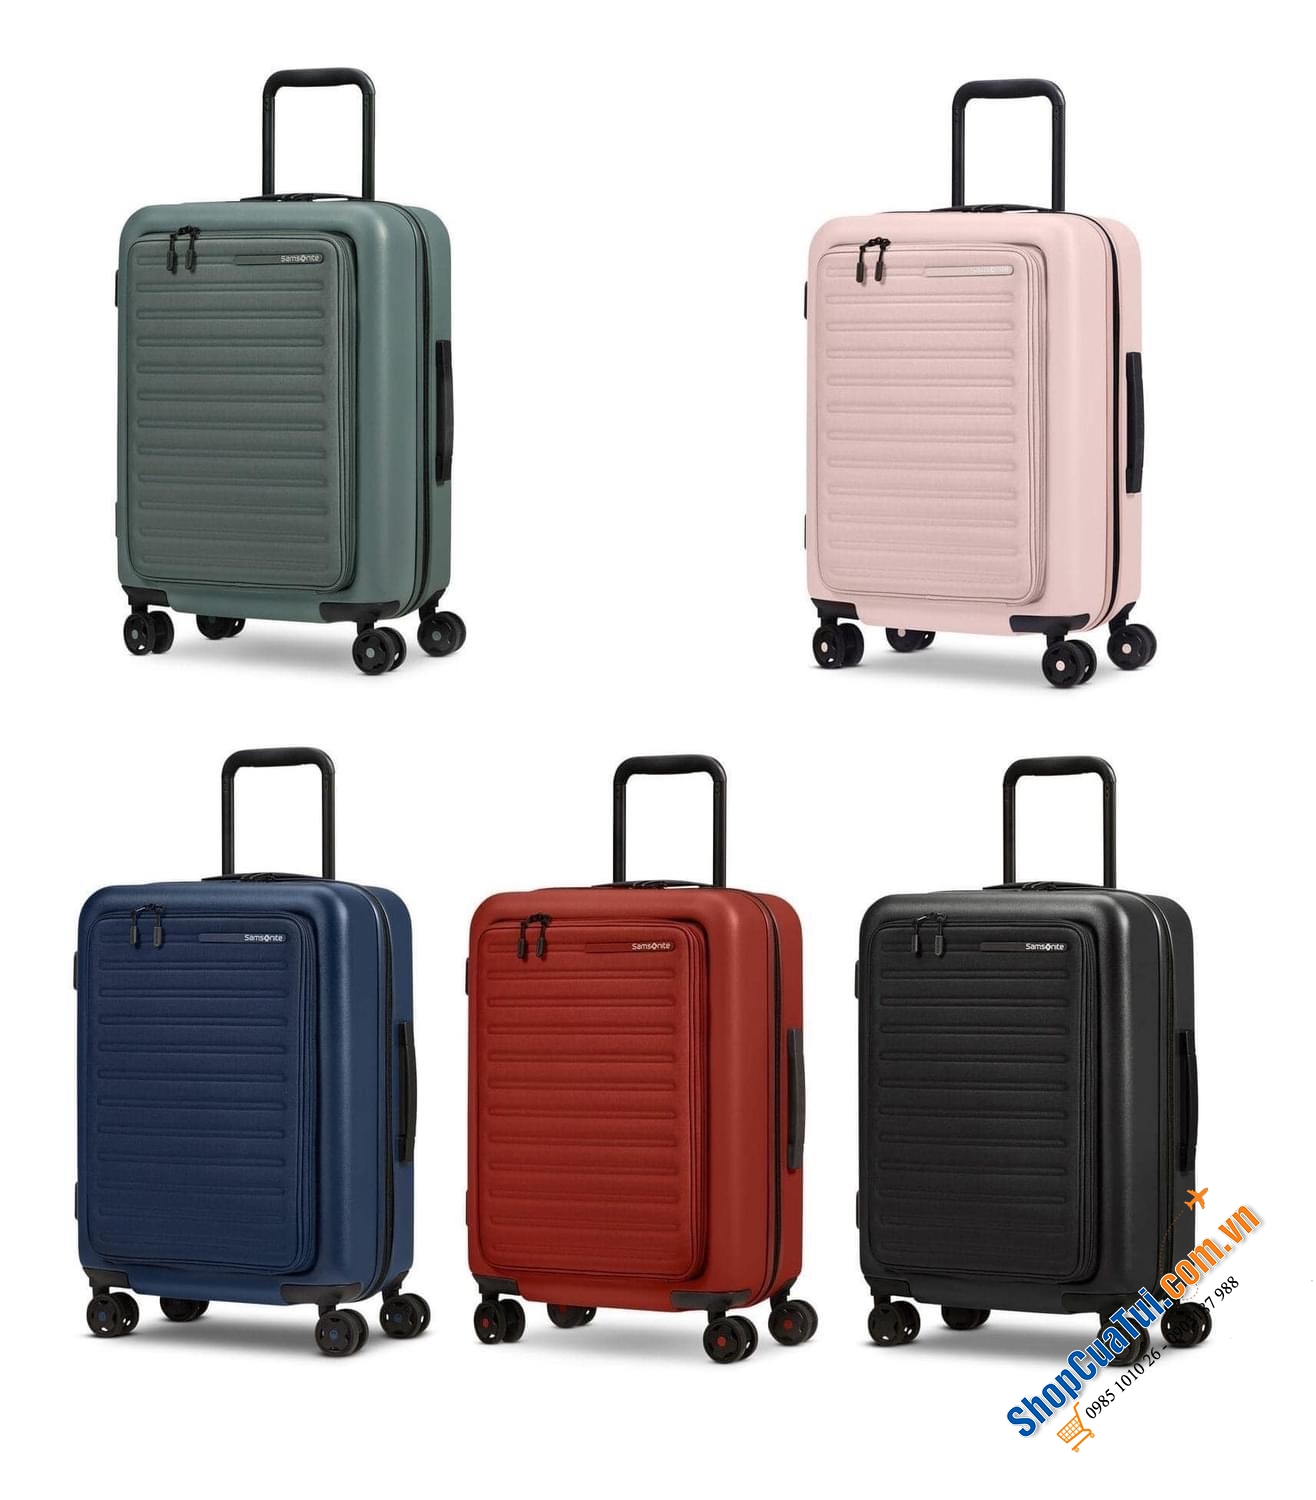 Valy Samsonite STACK D EASY ACCESS size cabin - có ngăn để laptop